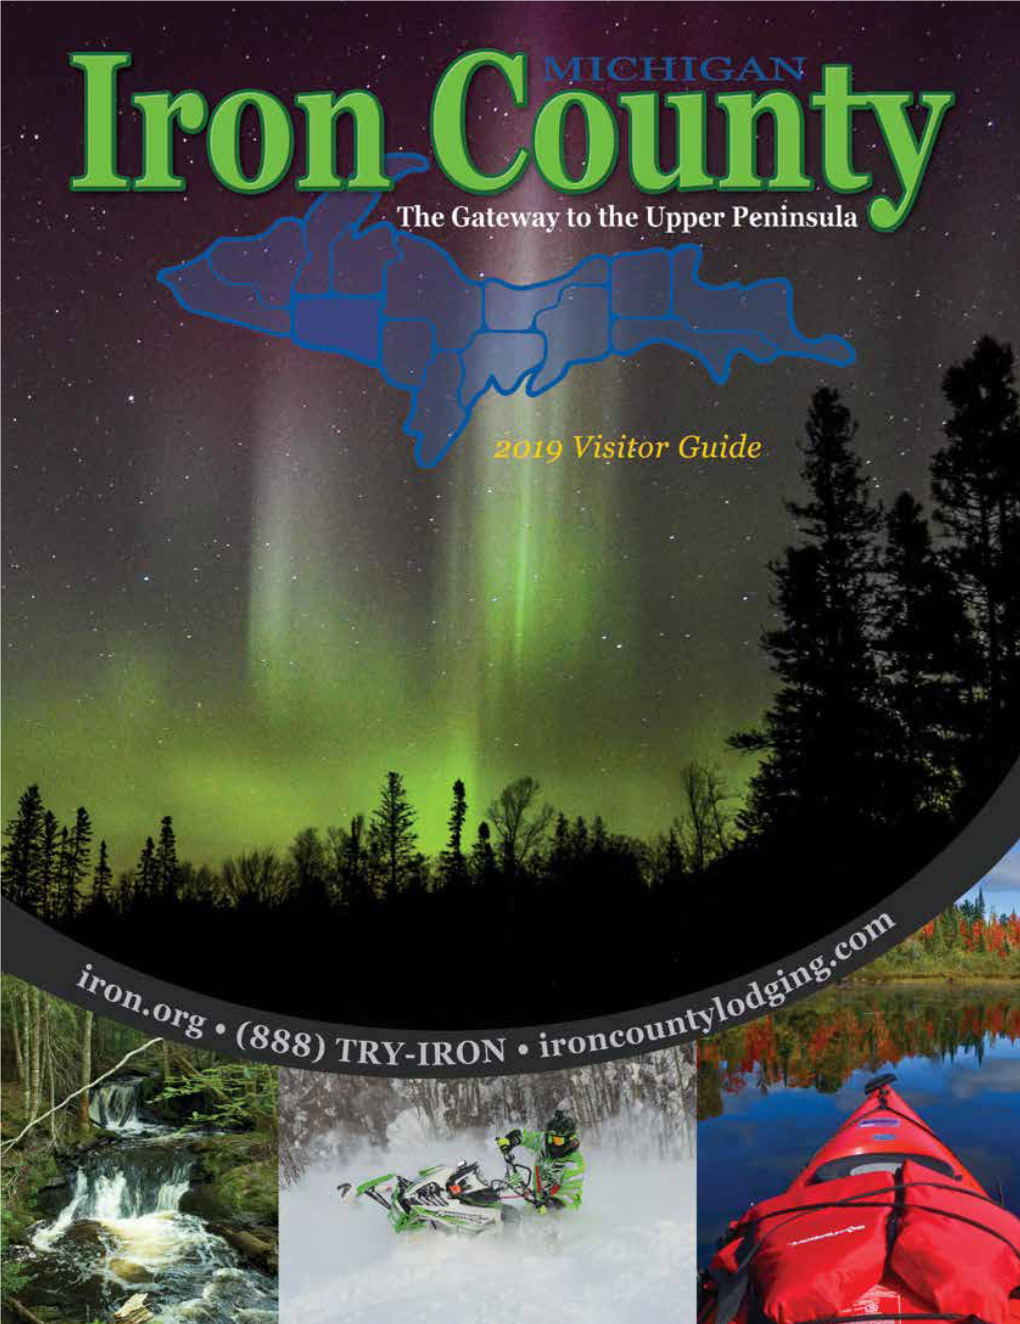 Download the Iron County Michigan Visitors Guide